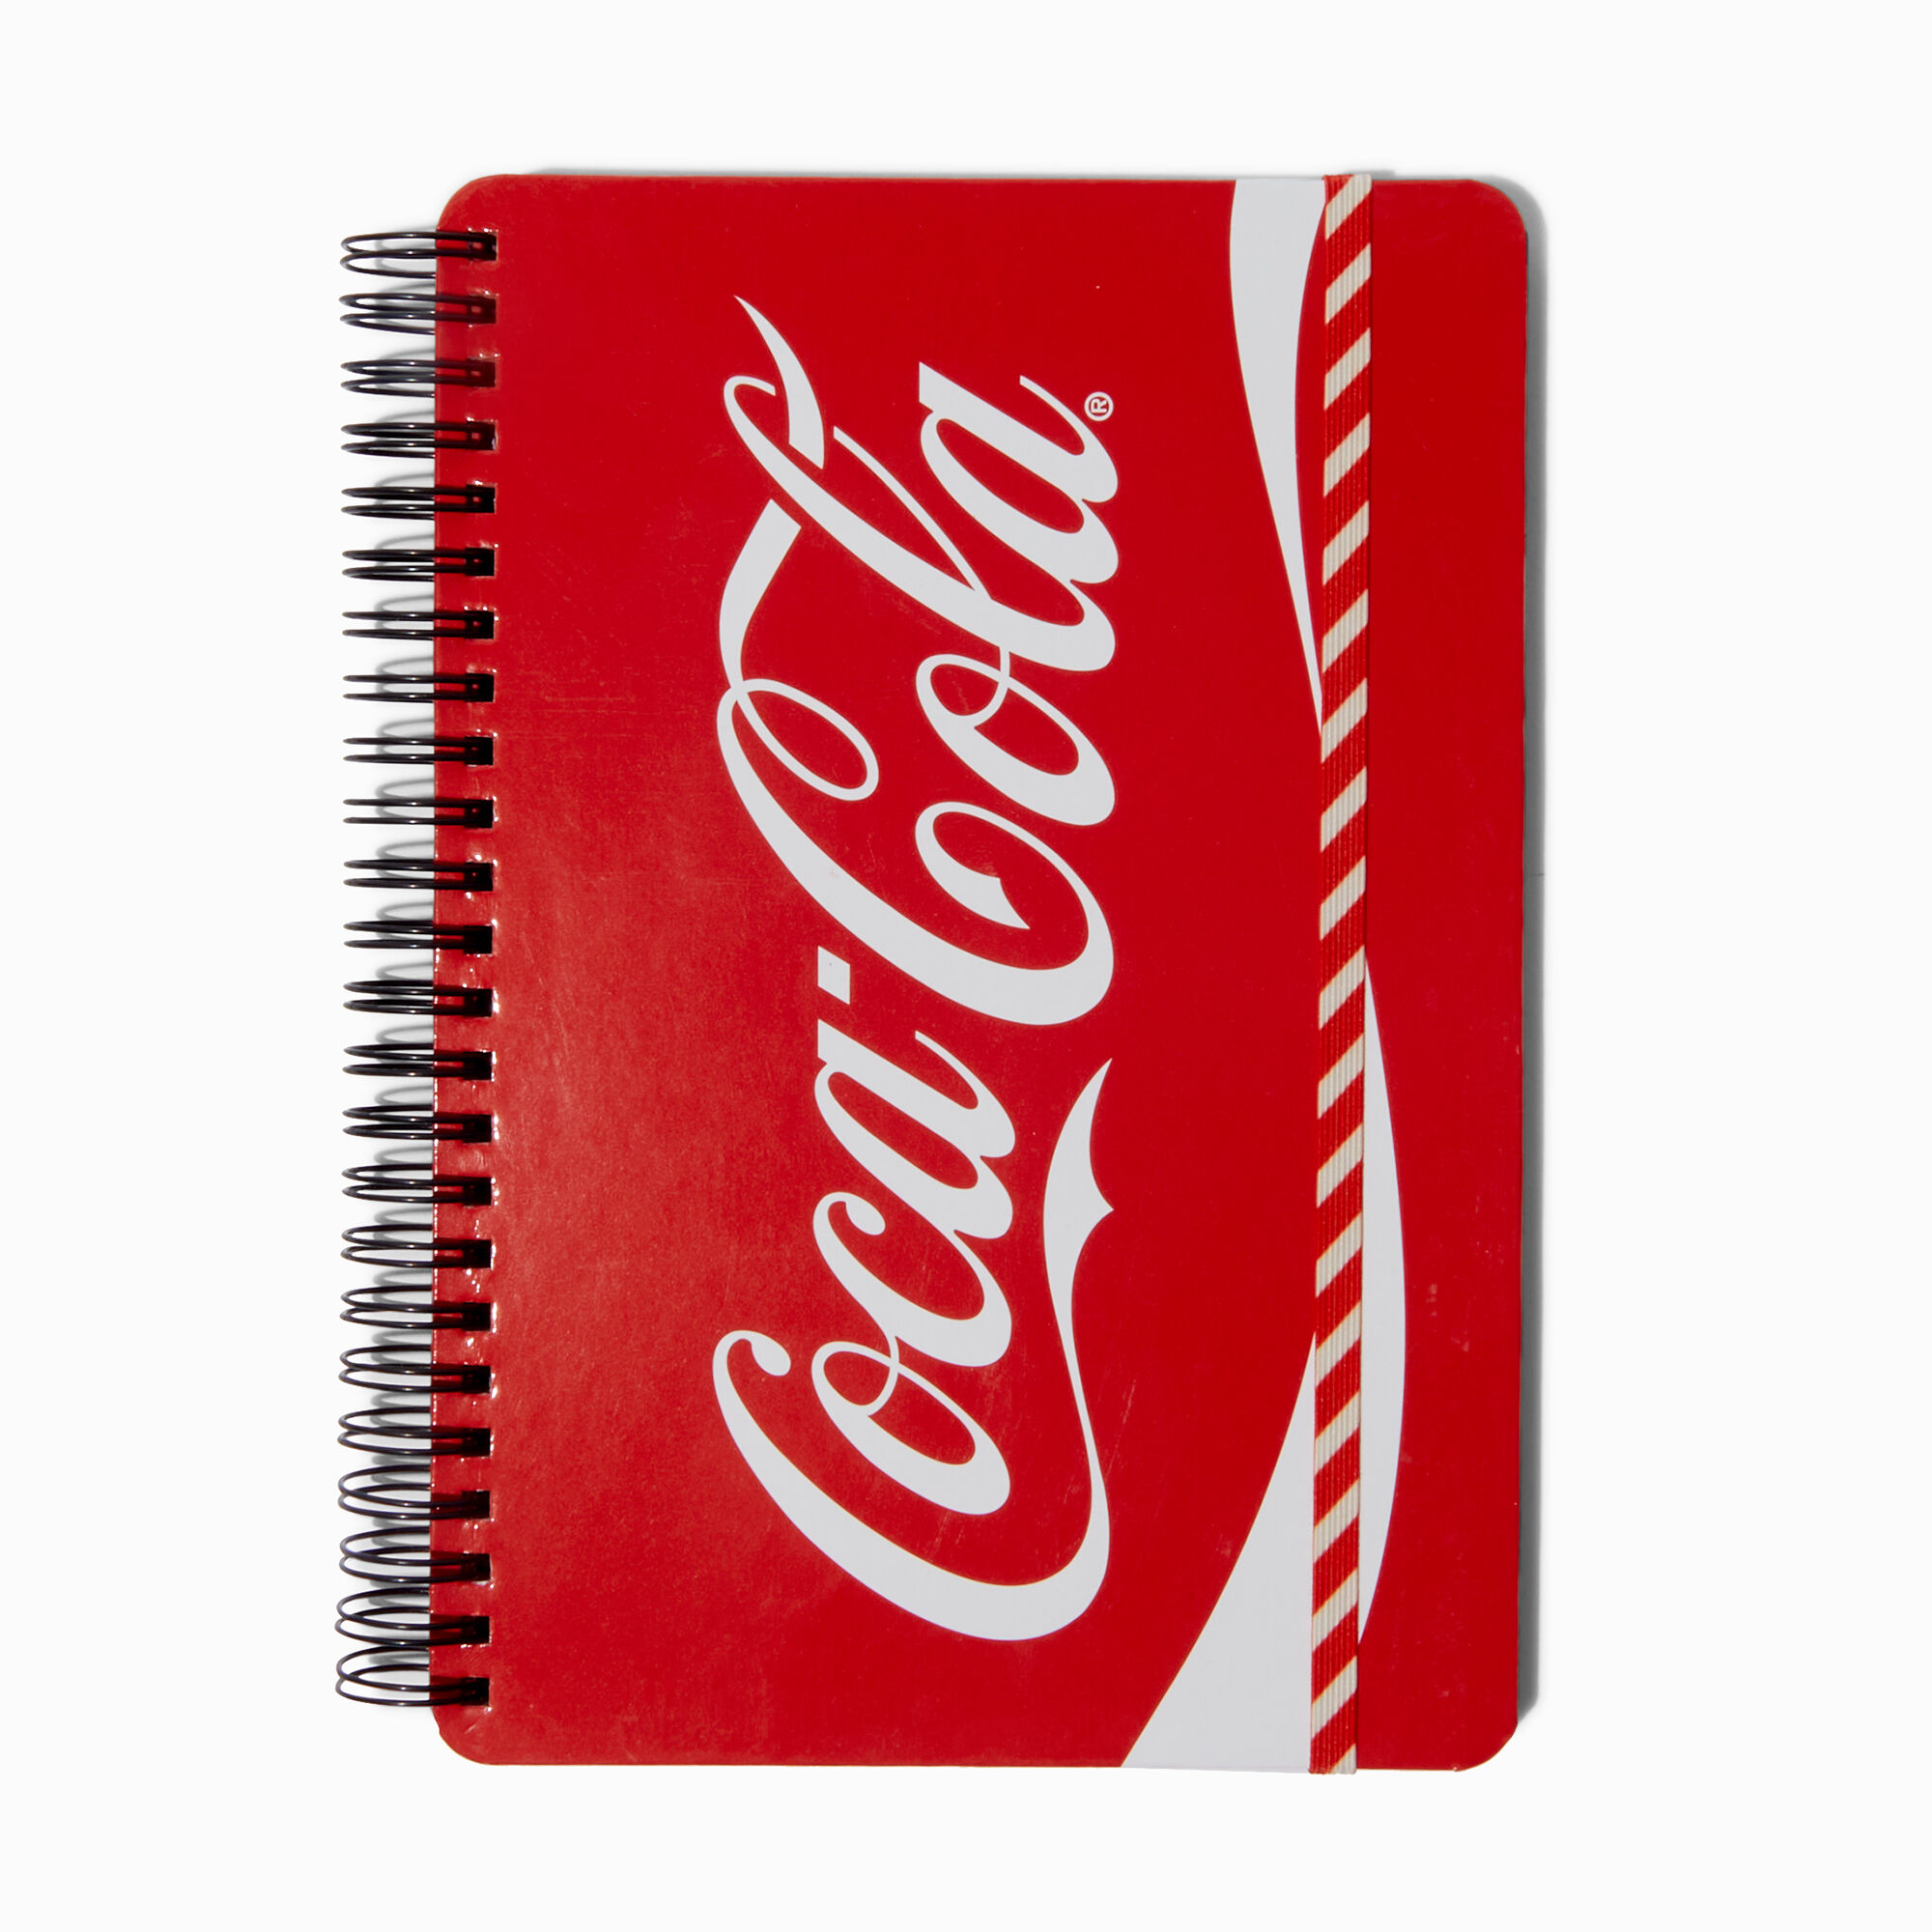 View Claires CocaCola A5 Notebook information